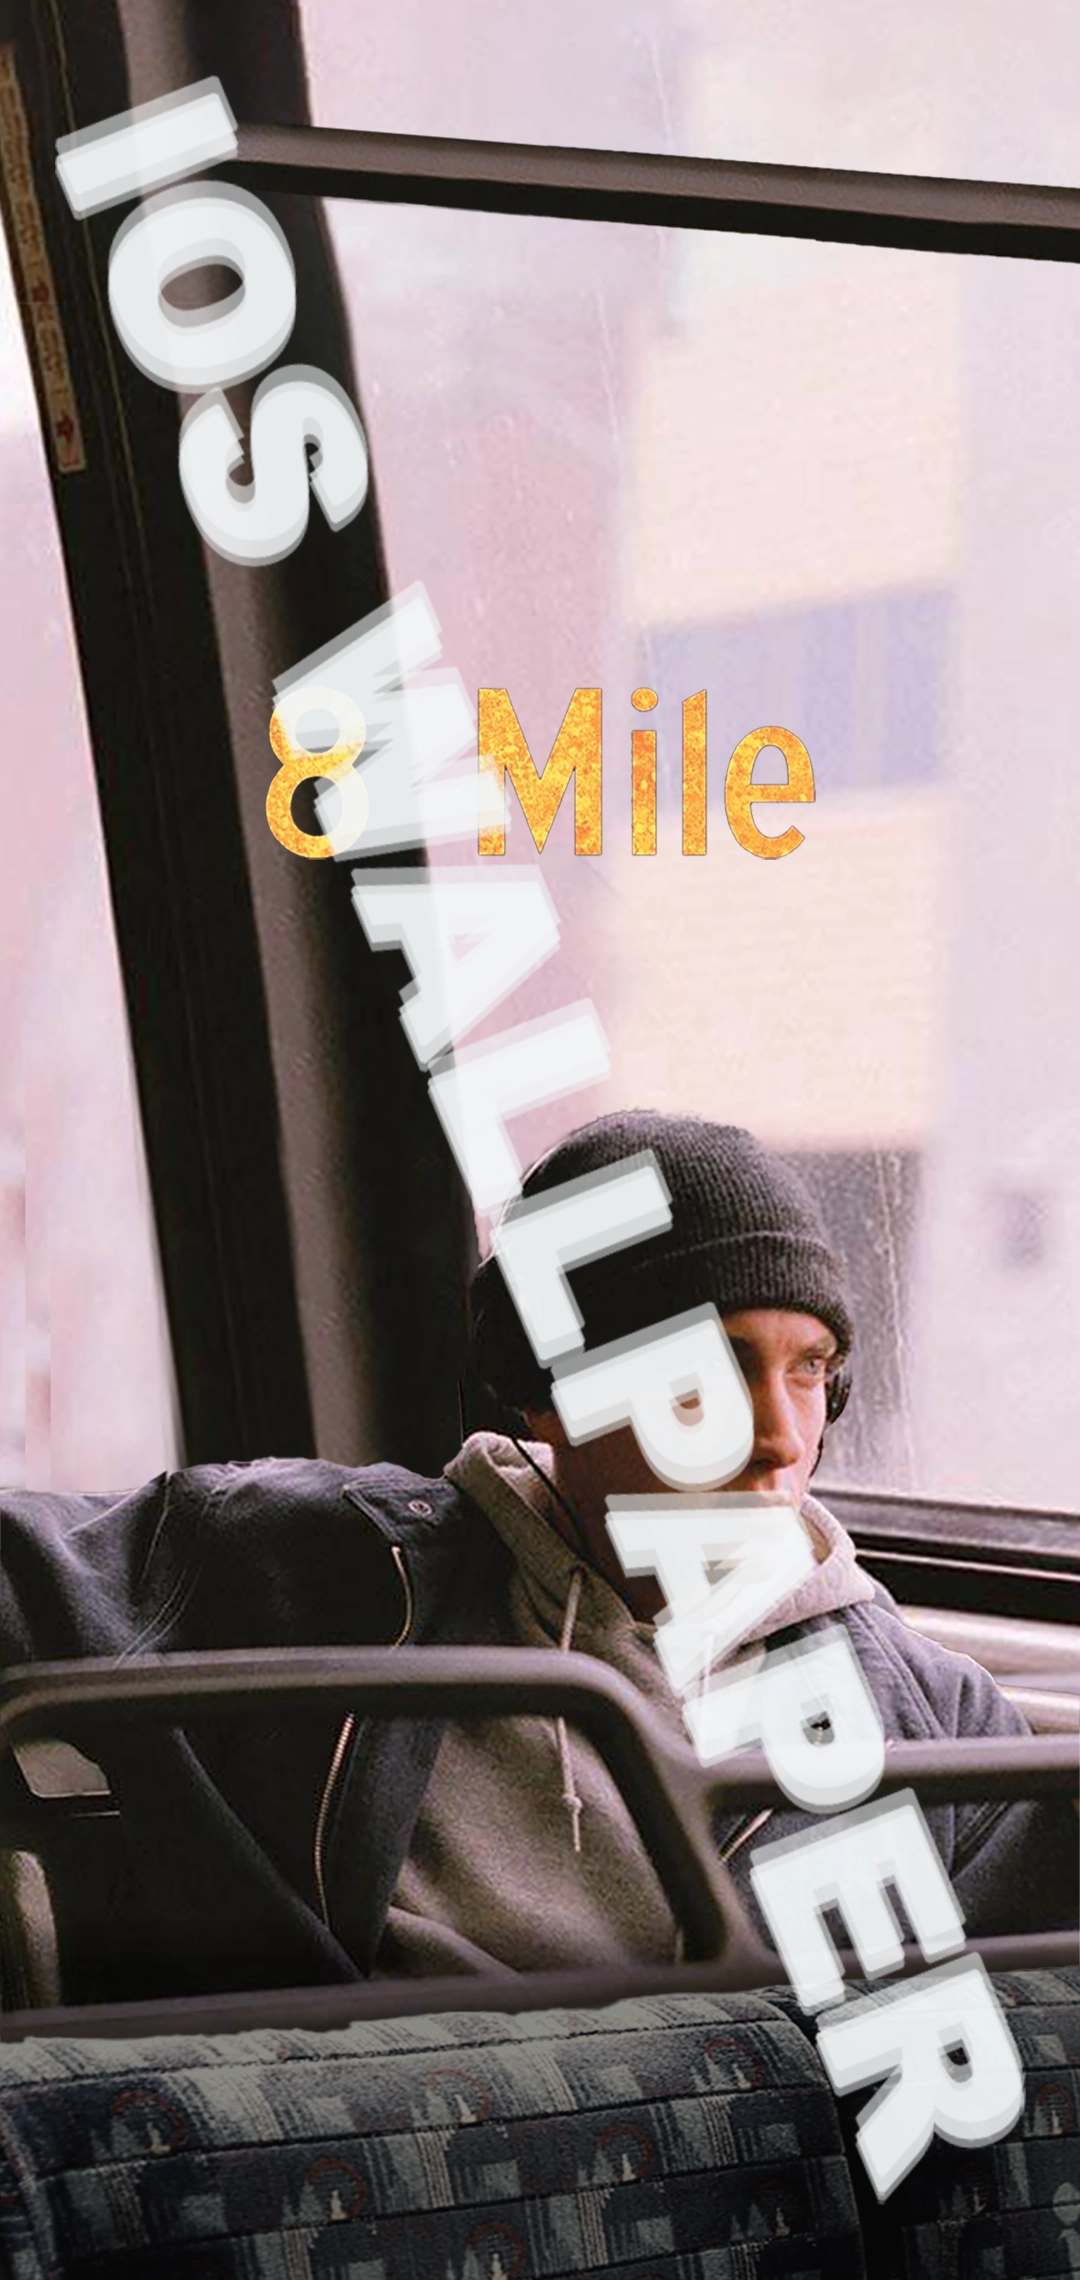 8 Mile - on the bus | Digital Download